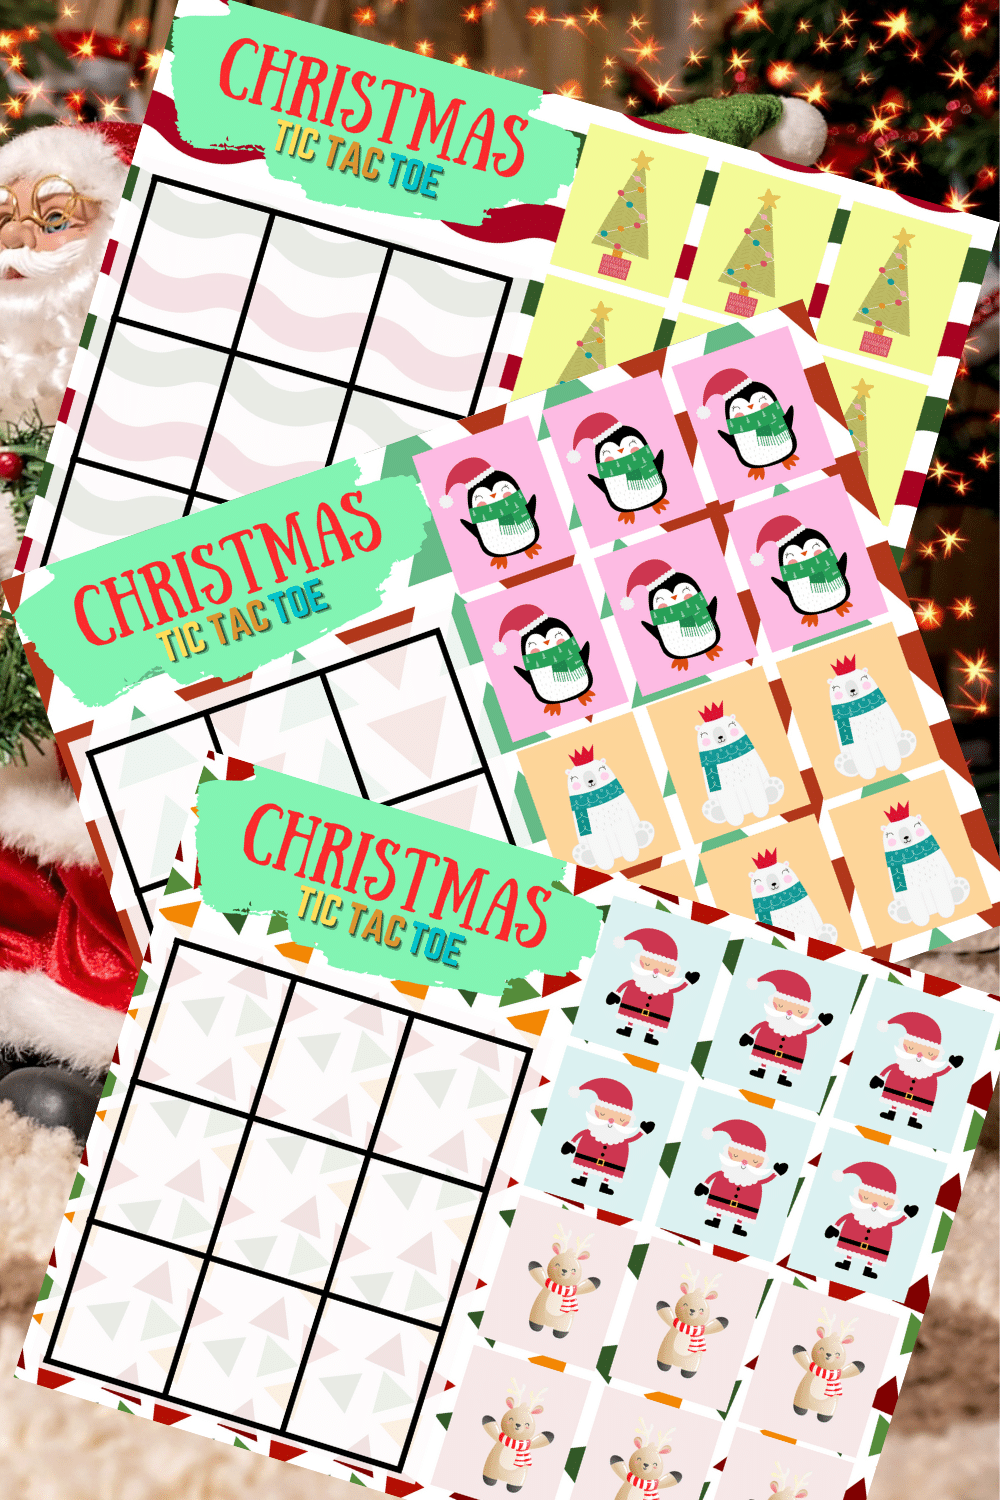 3 printable Christmas Tic Tac Toe games  with Christmas decor in the background